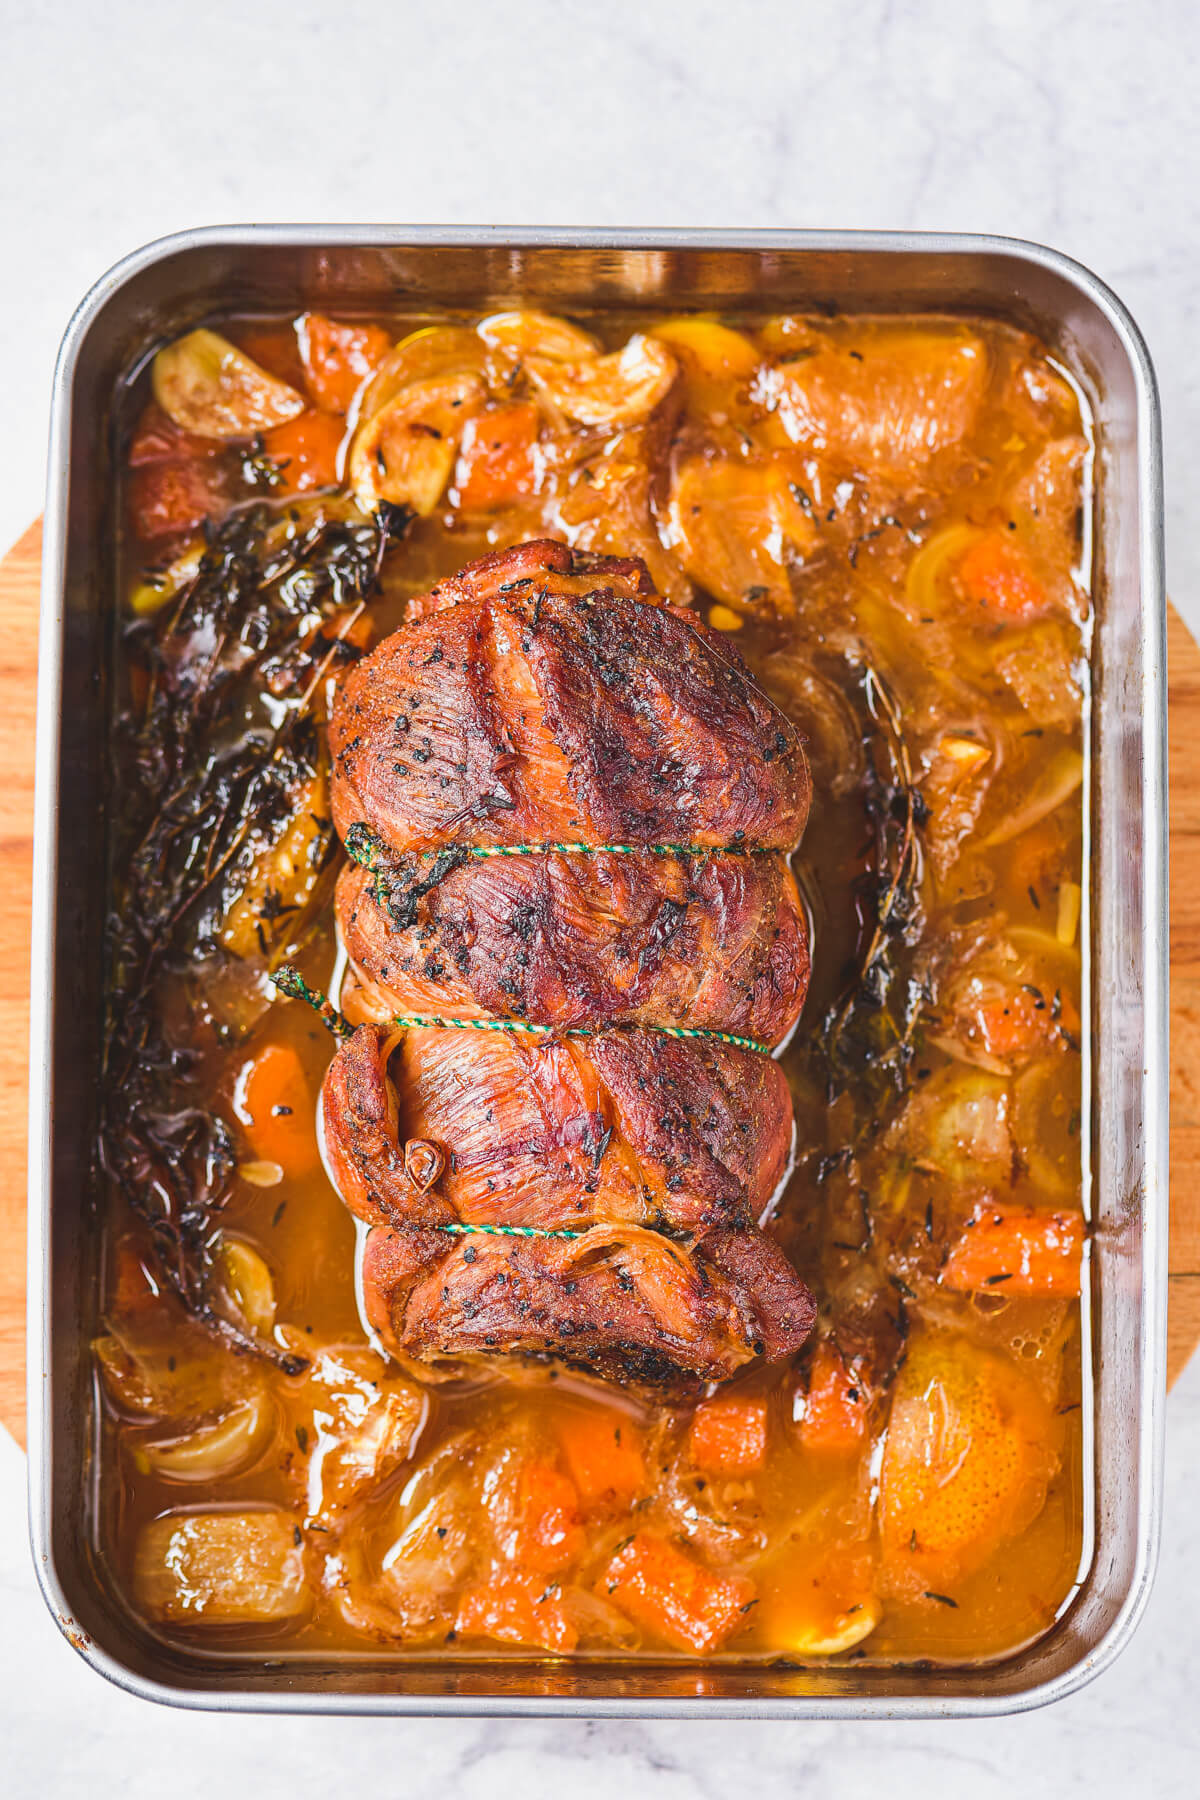 A fully cooked rolled lamb breast roast in a roaster surrounded by beef stock, vegetables, and fresh thyme leaves.